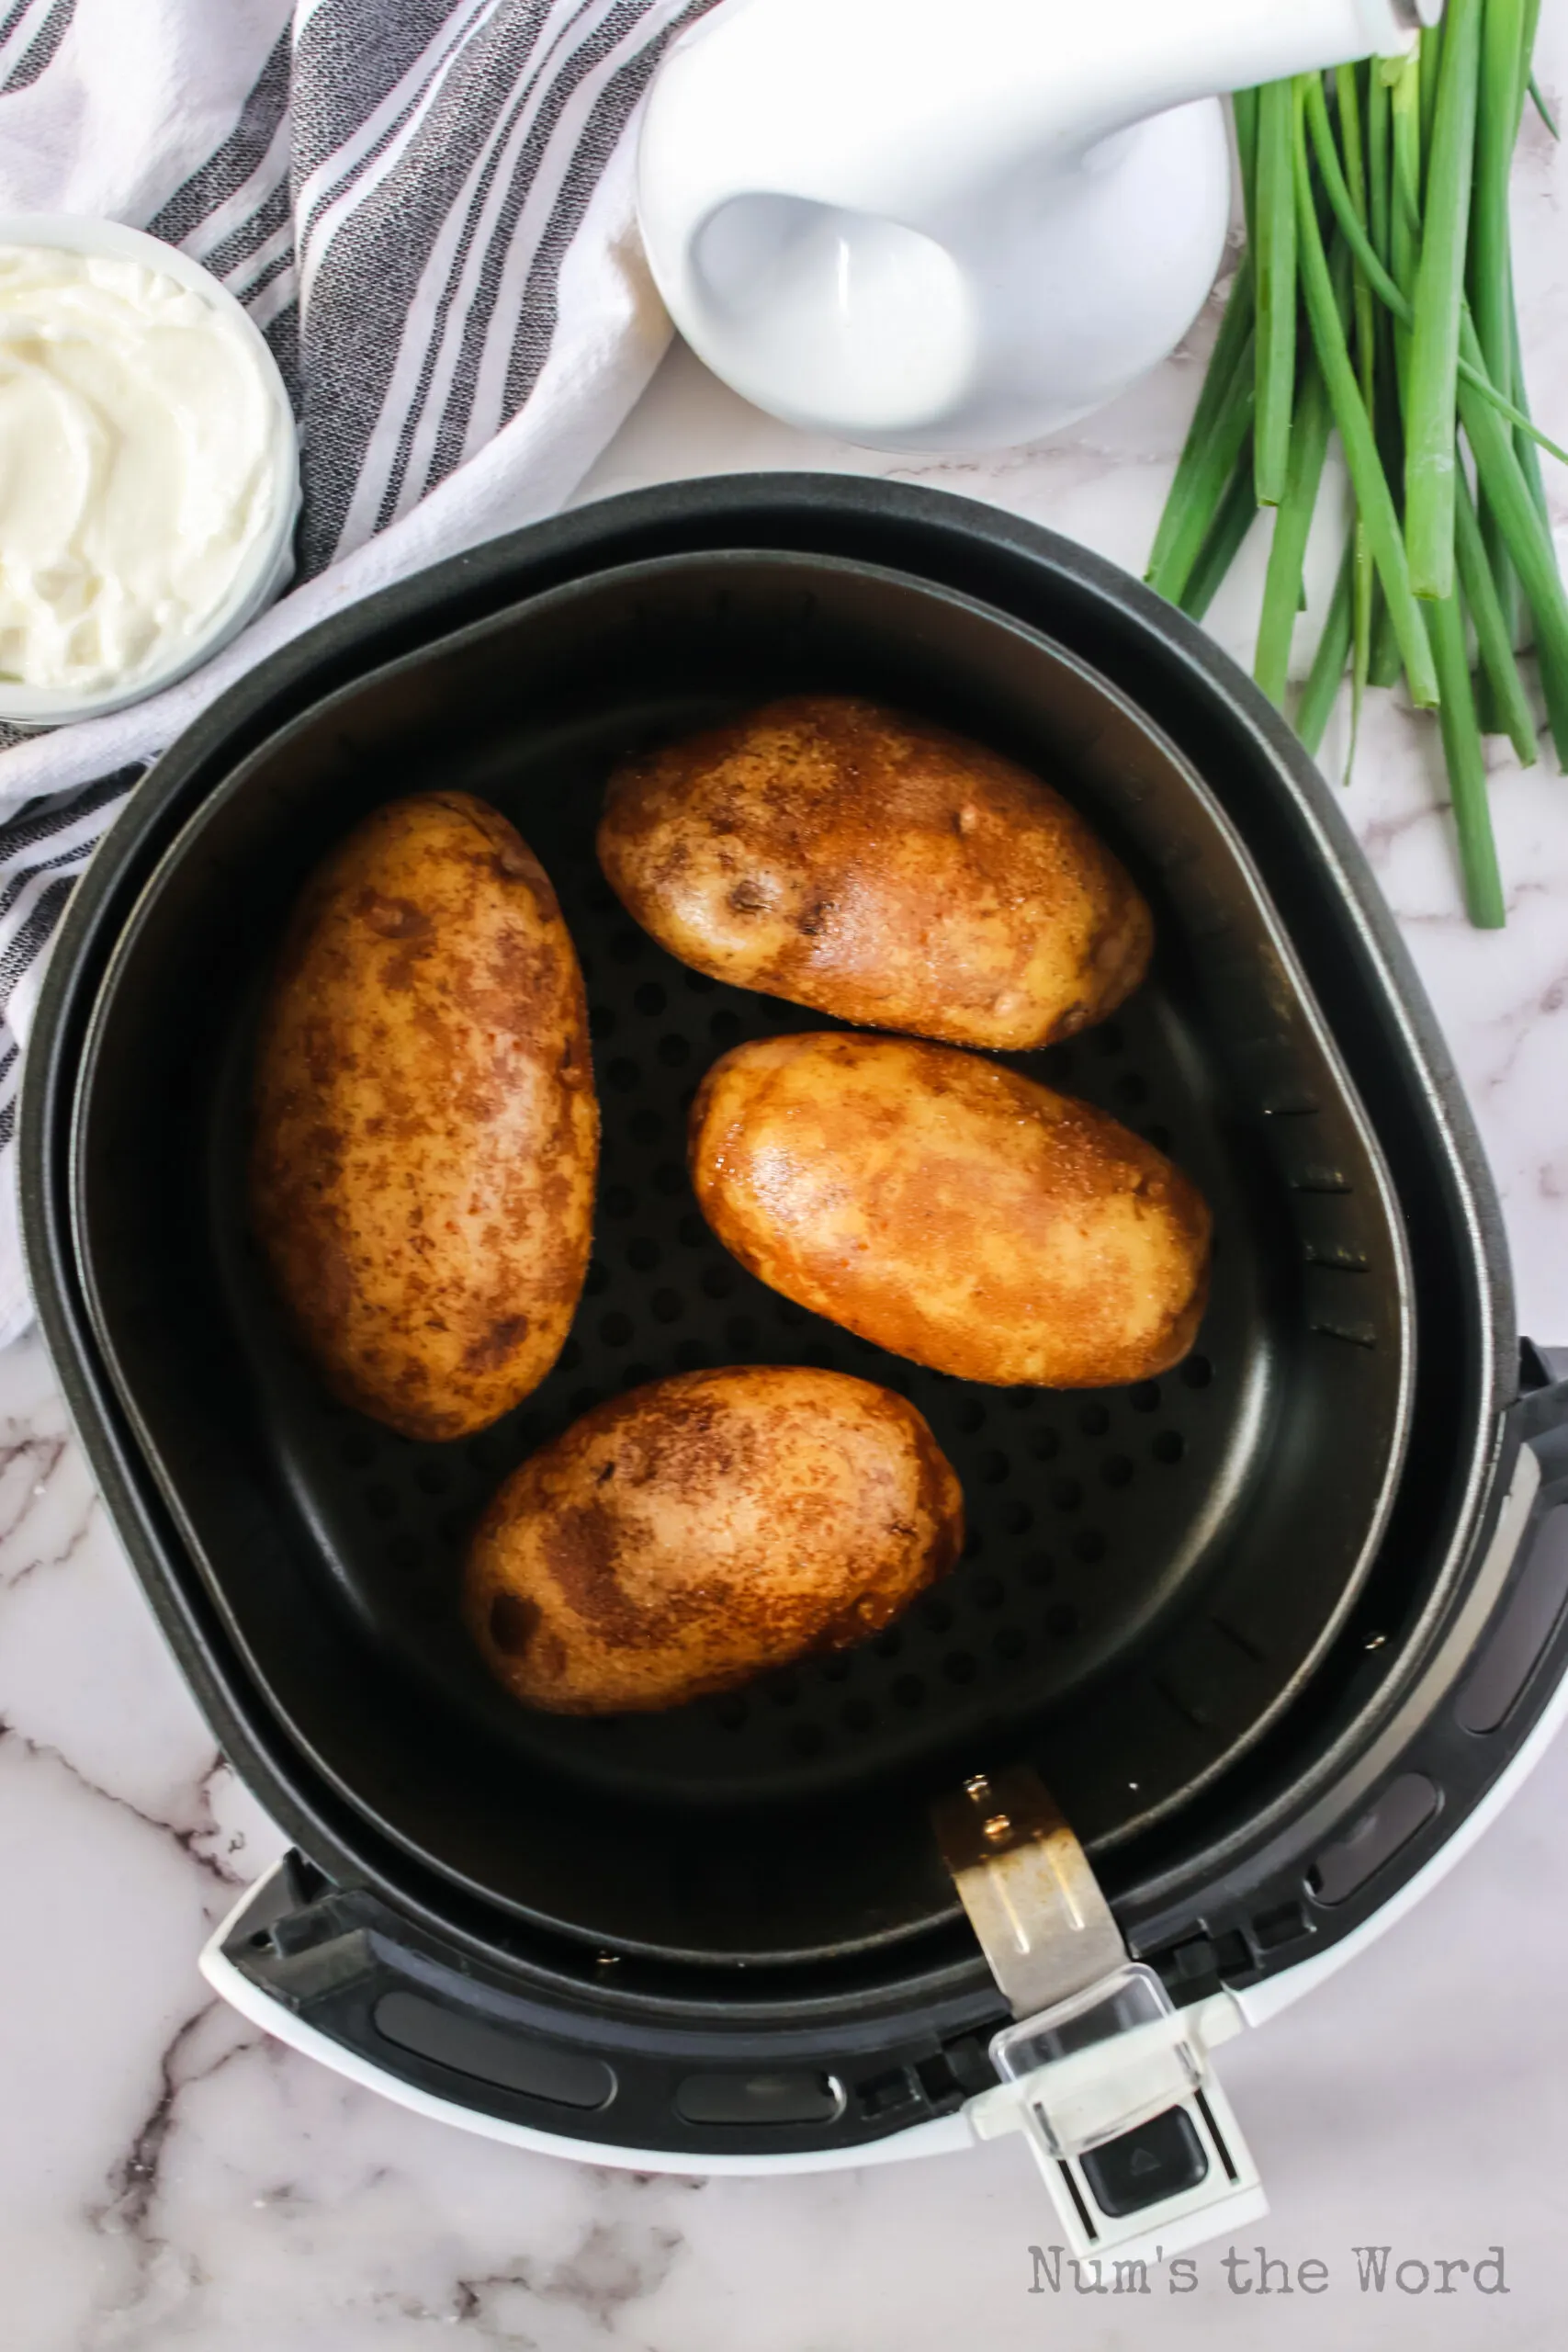 Potatoes in the air fryer ready to bake